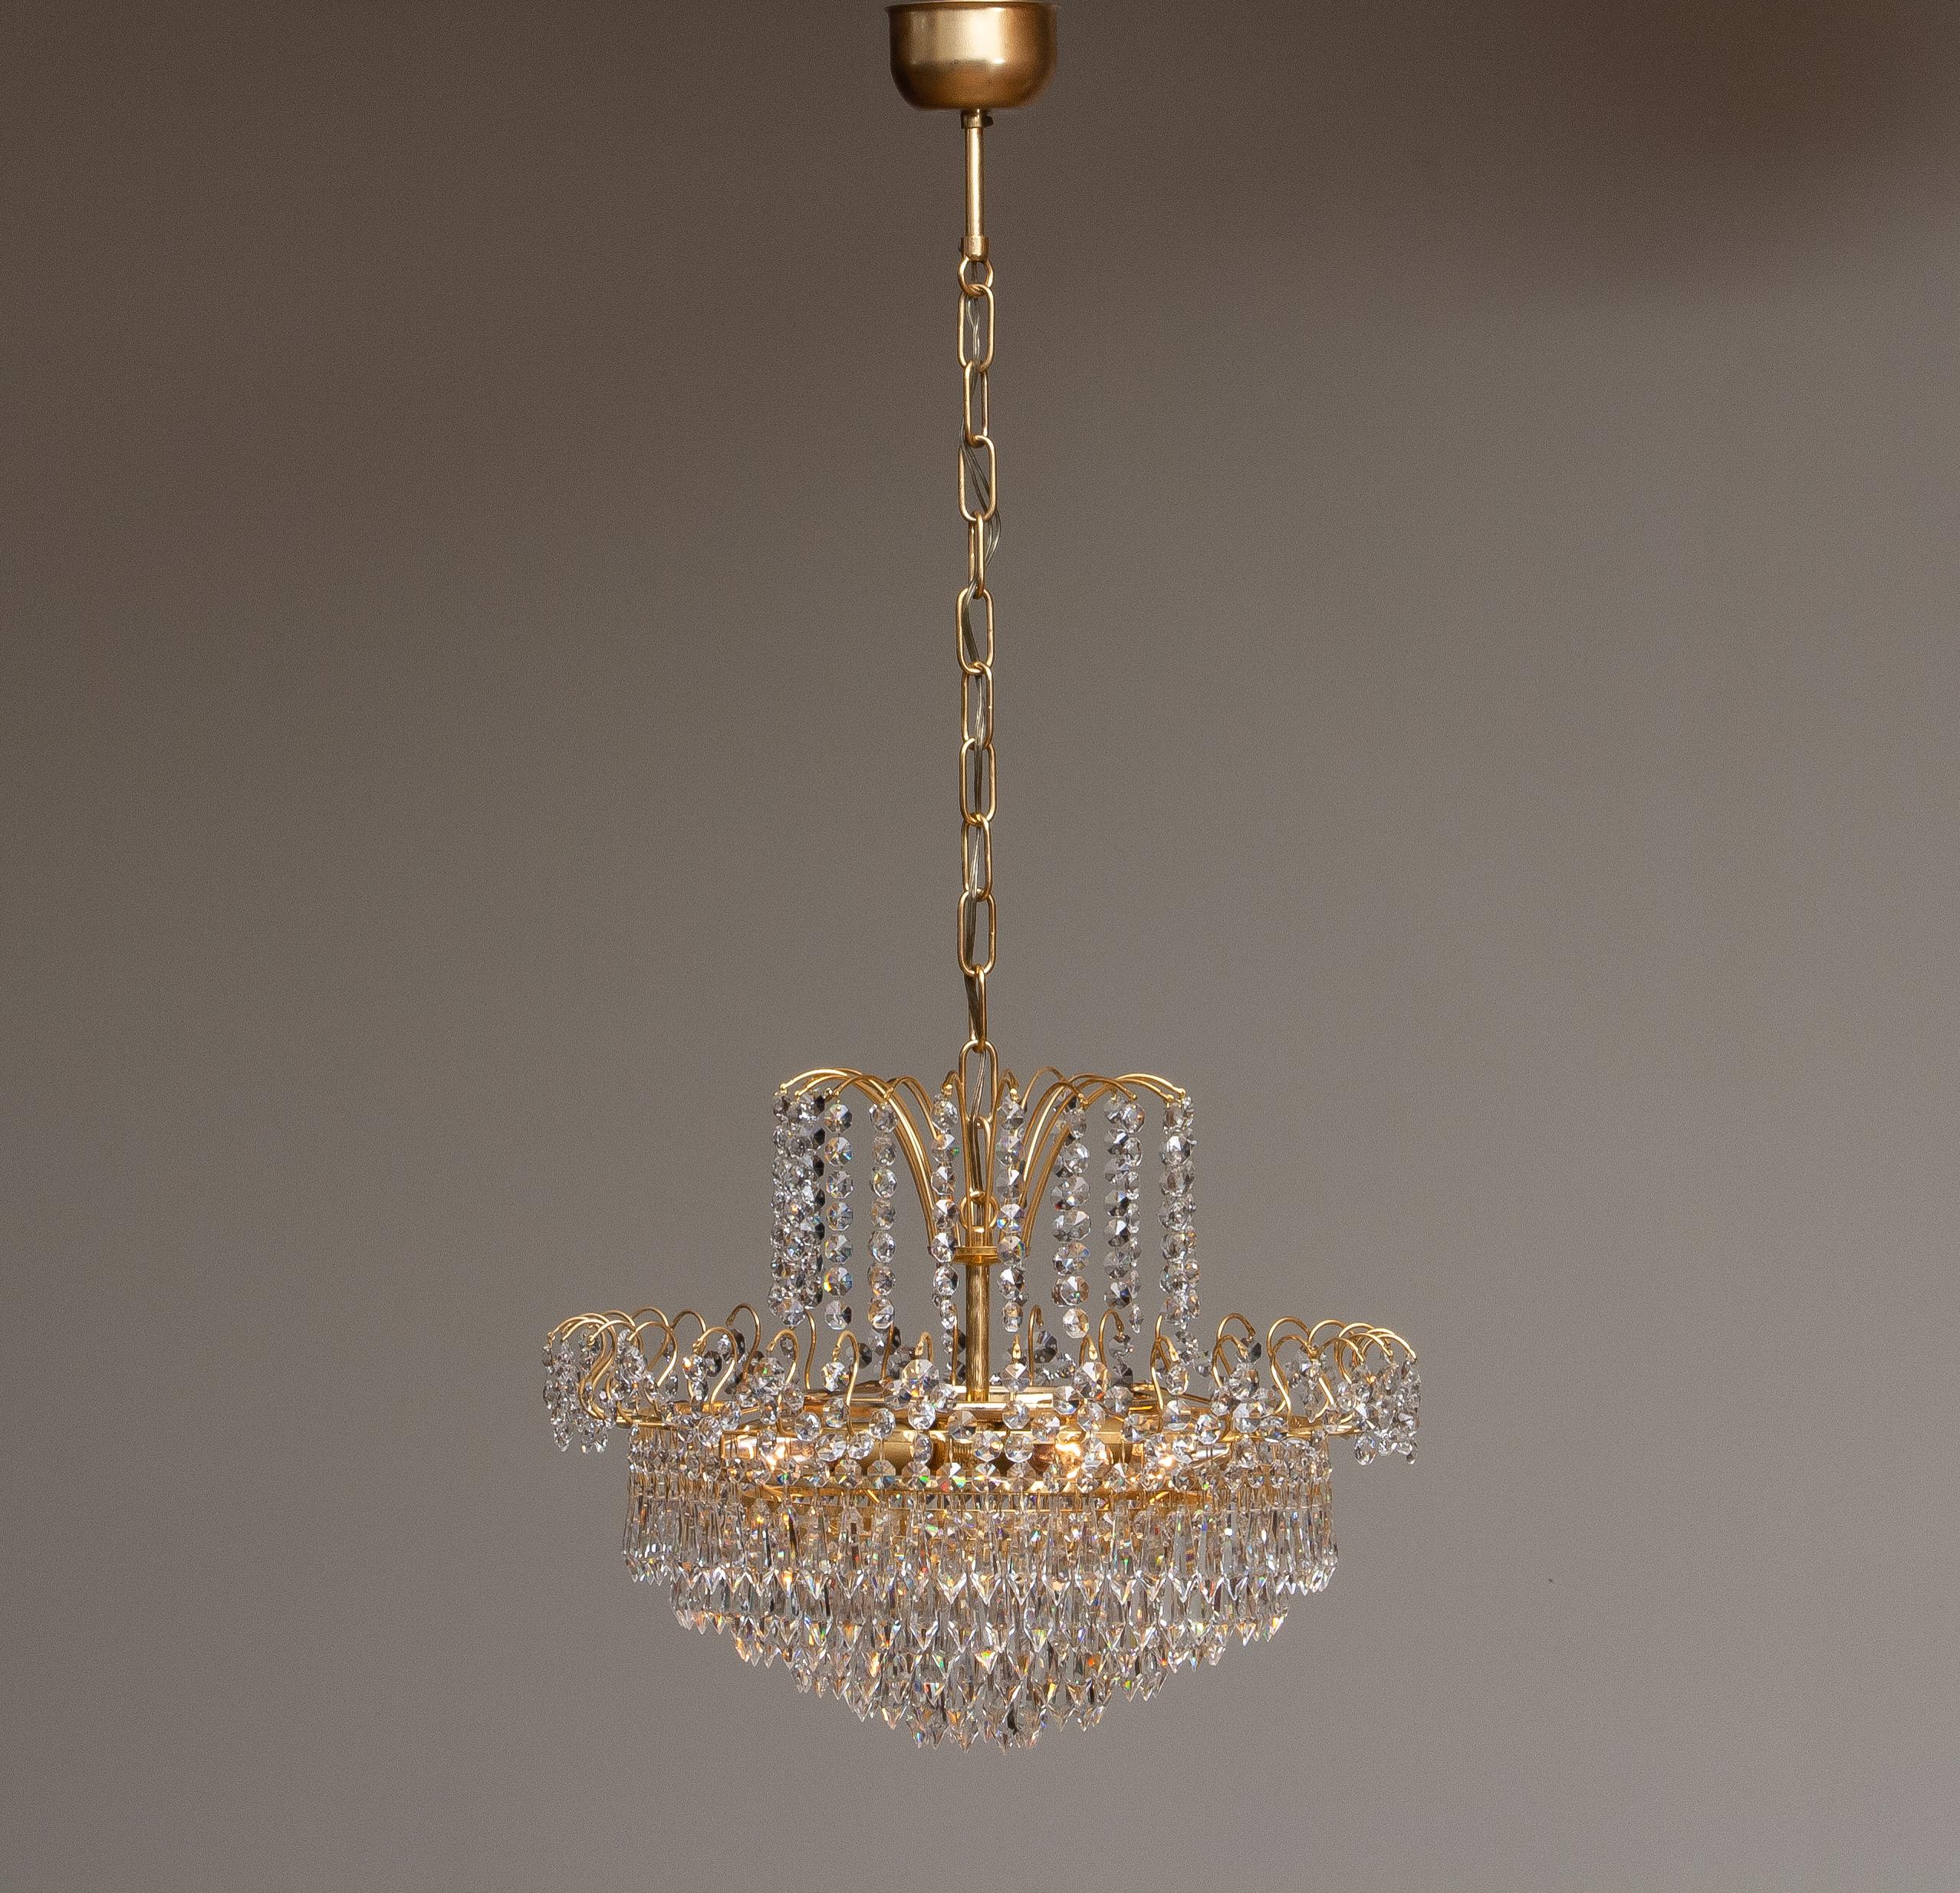 1970s, Gold-Plated and Faceted Crystal Chandelier Attributed to Rejmyre, Sweden 1